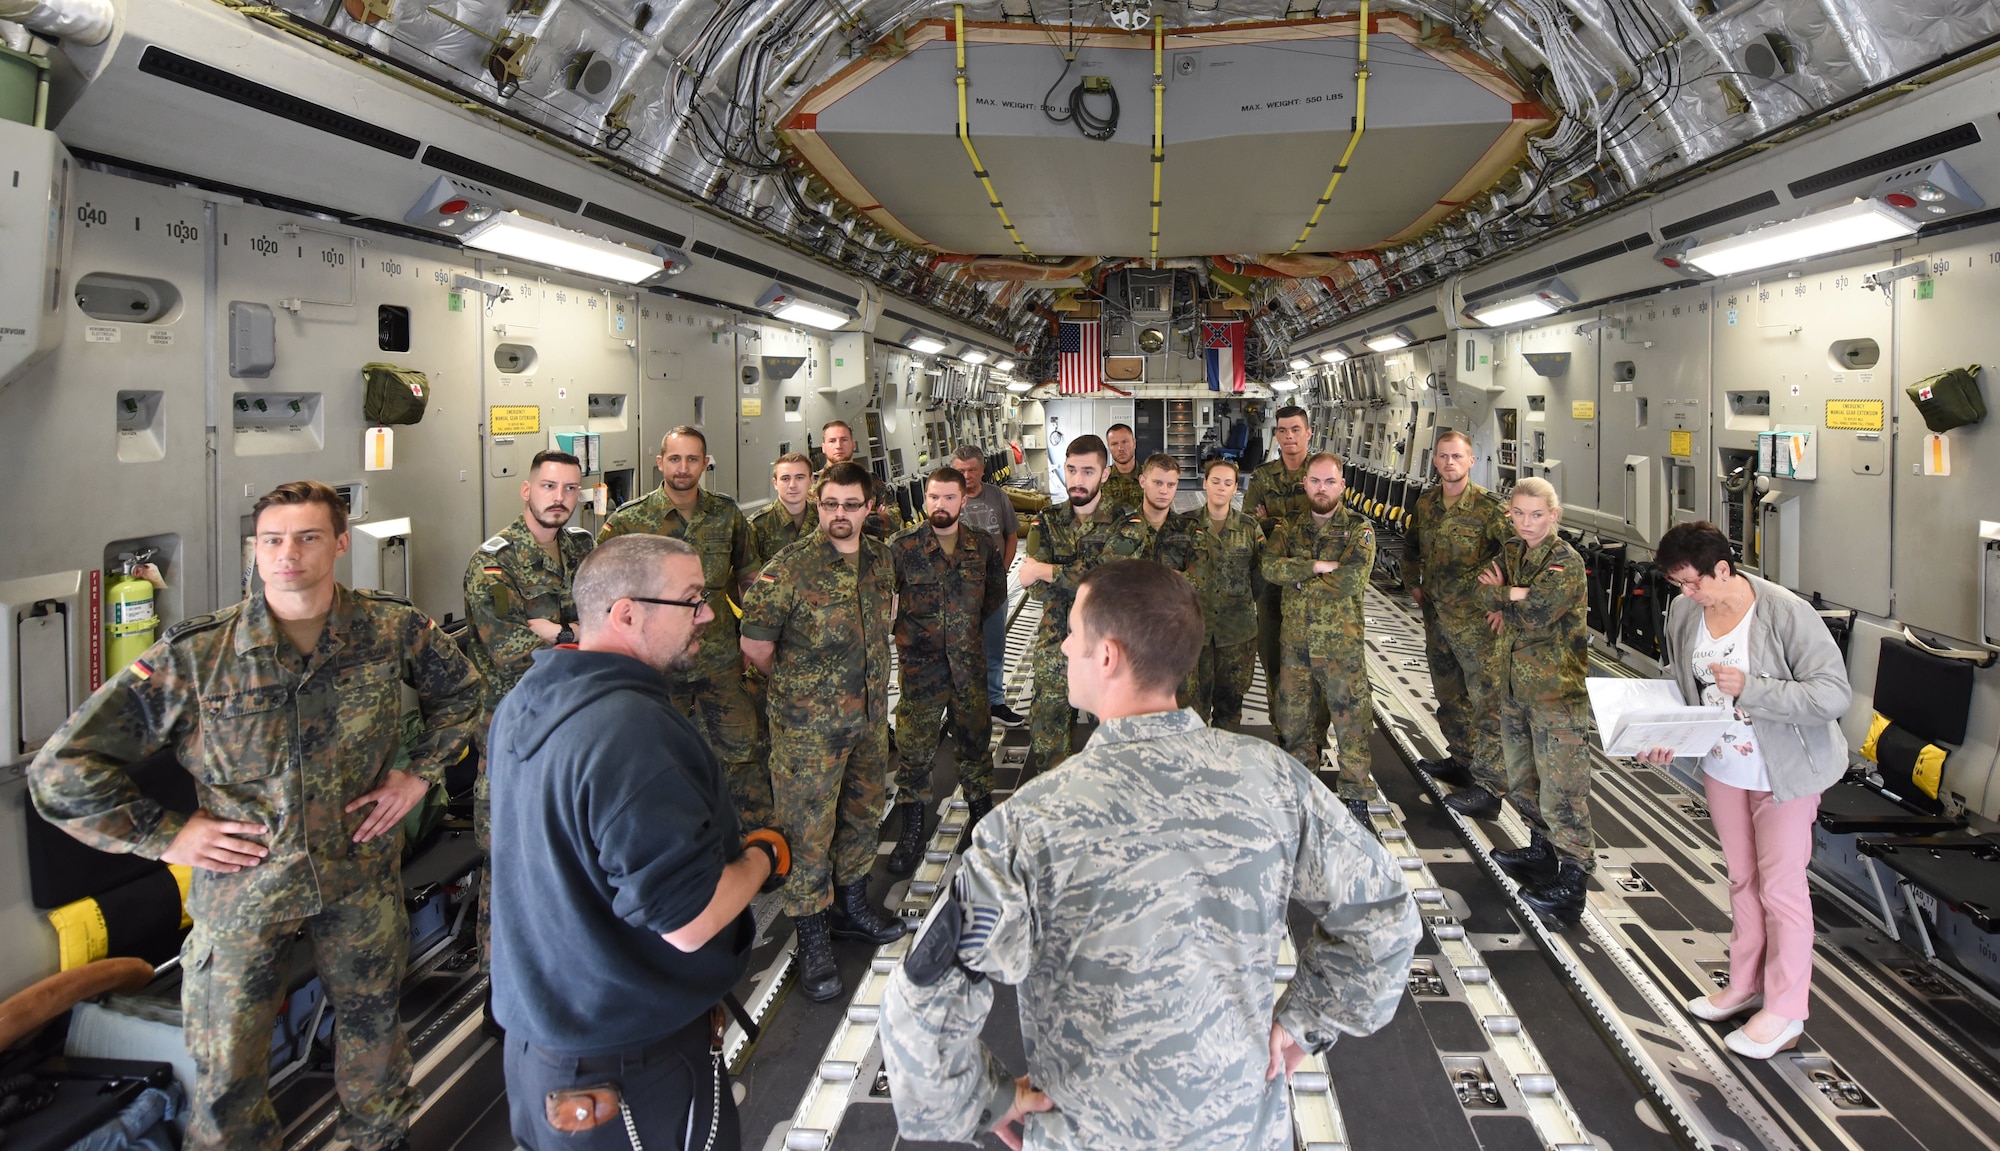 U.S. Air Force Technical Sgt. Alex Rose, 721st Aerial Port Squadron Ramp Service Supervisor, gives German Forces loadmasters a tour inside the static C-17 Globemaster on Ramstein Air Base, Germany, Sep. 13, 2018. These kinds of exercises mutually benefit the United States and Germany by further establishing cooperation and transparency between the two countries.